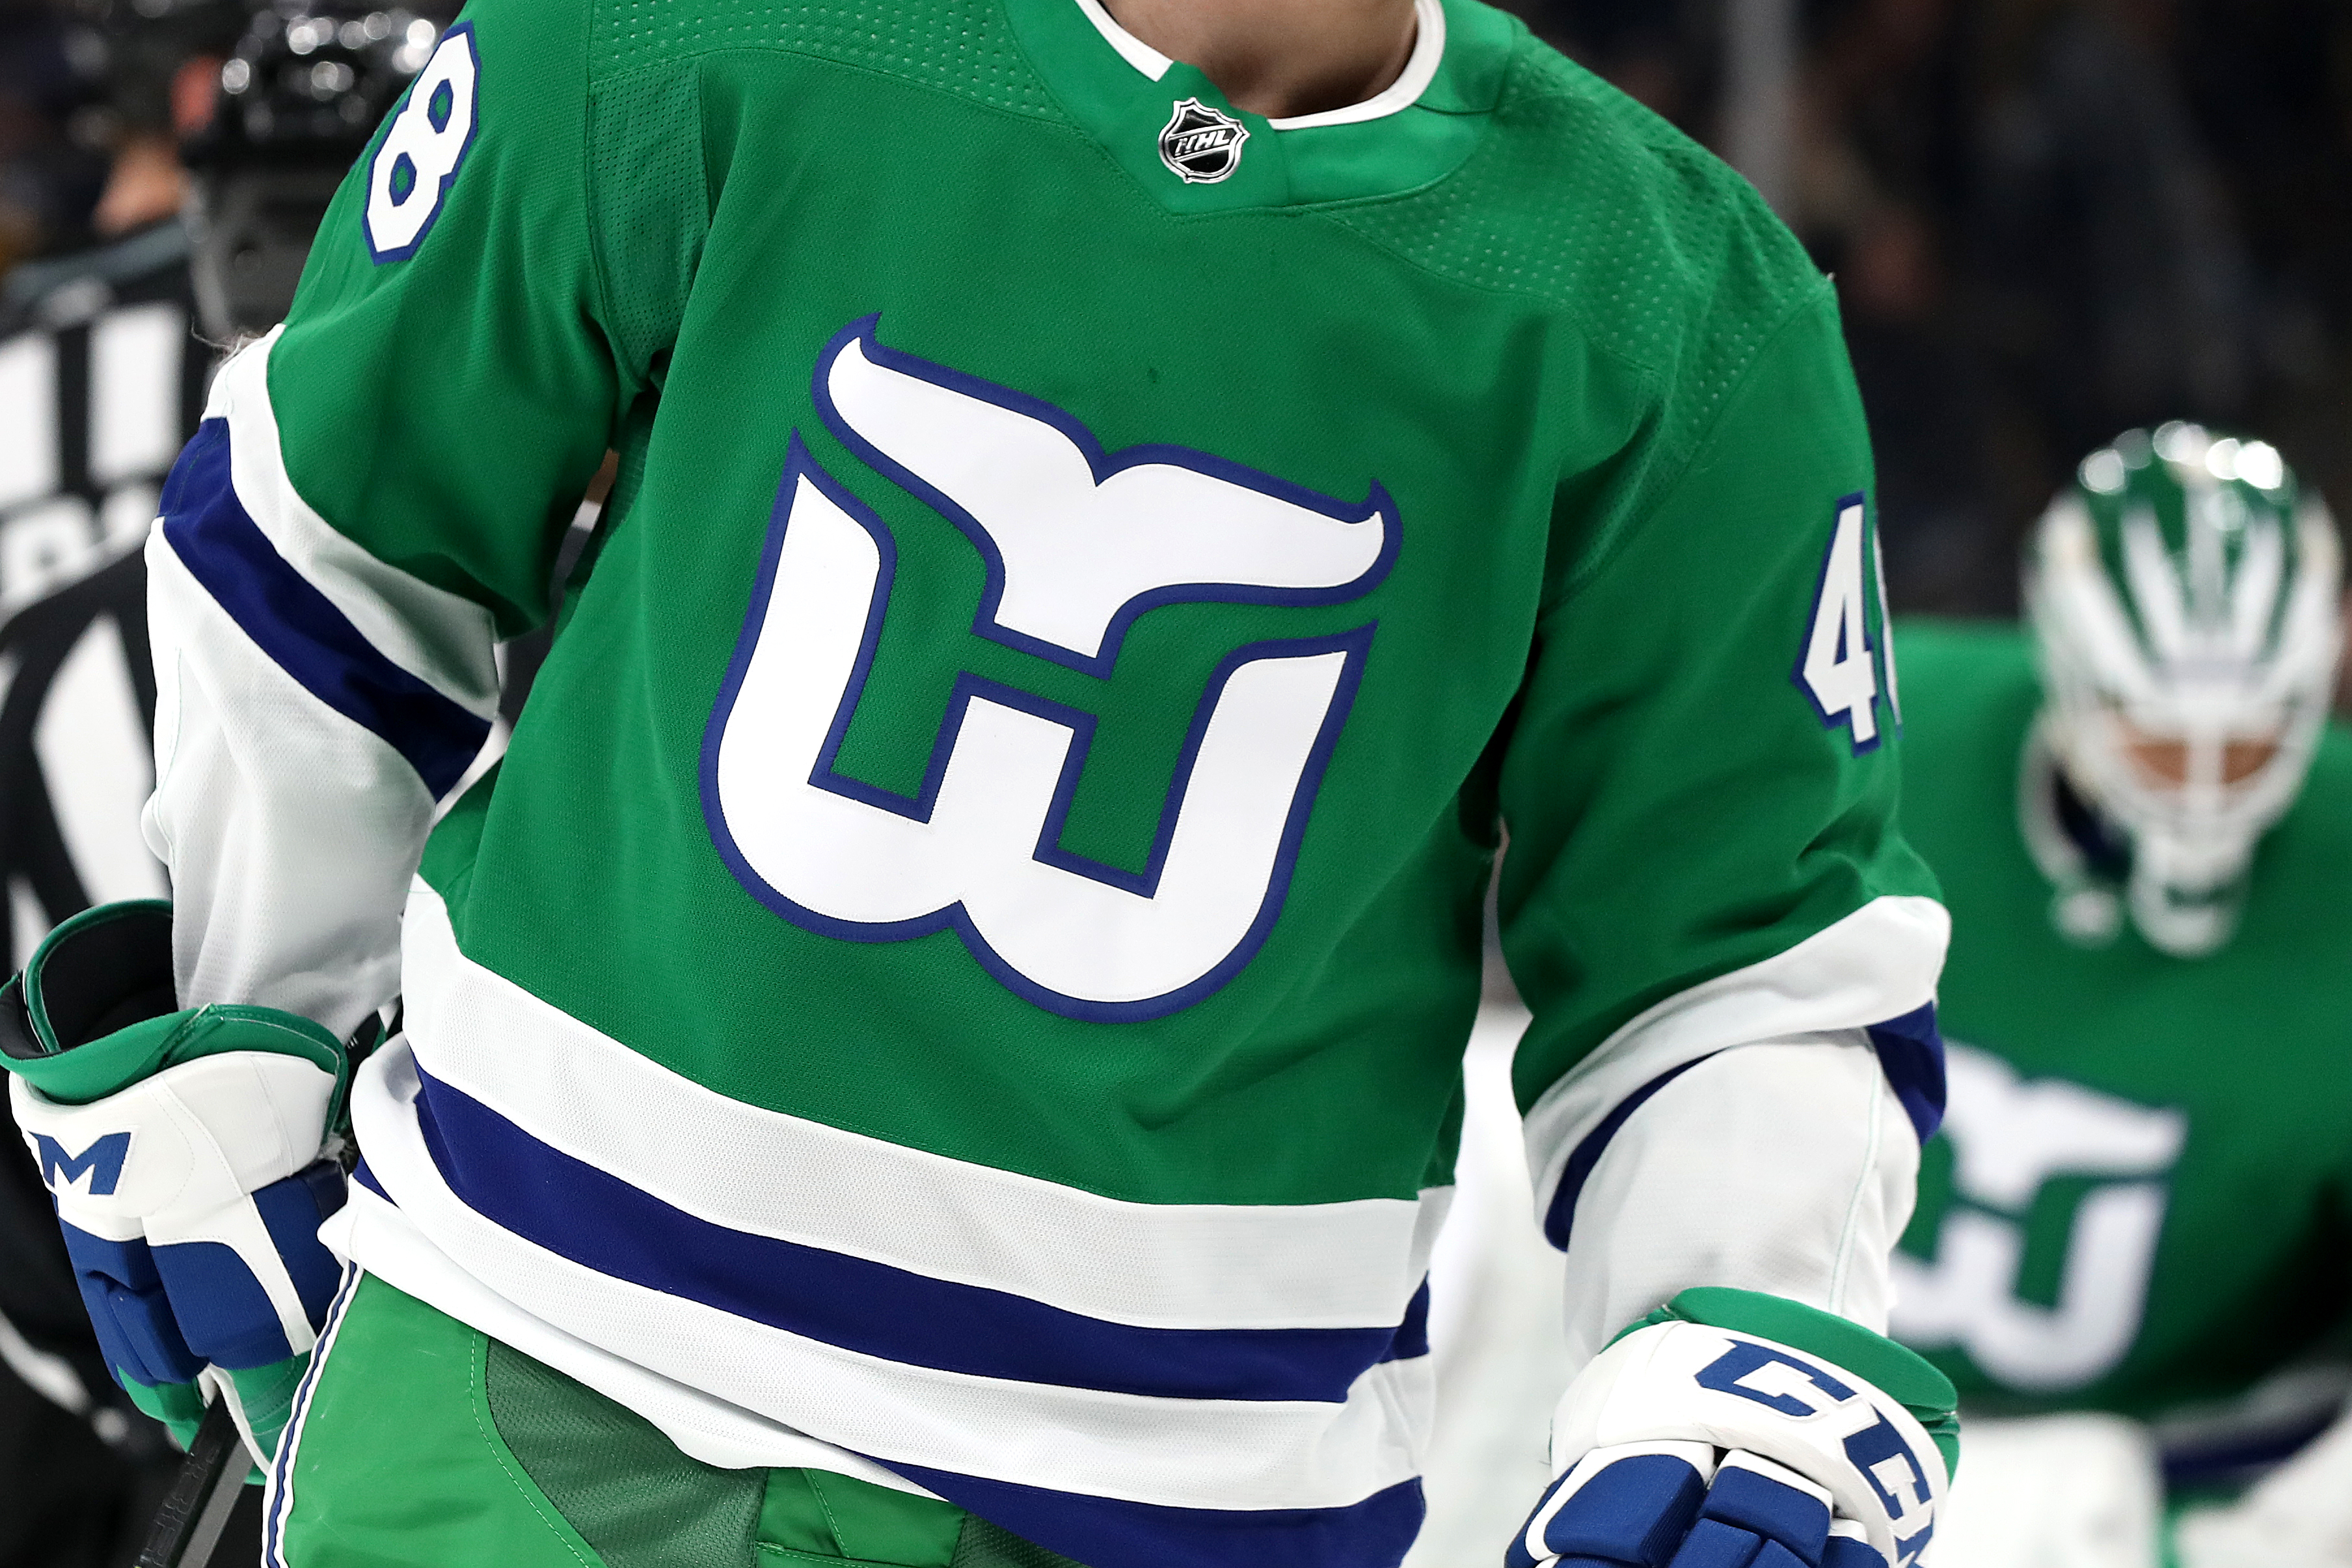 The Hurricanes unveiled Hartford Whalers throwbacks; people are mad online  